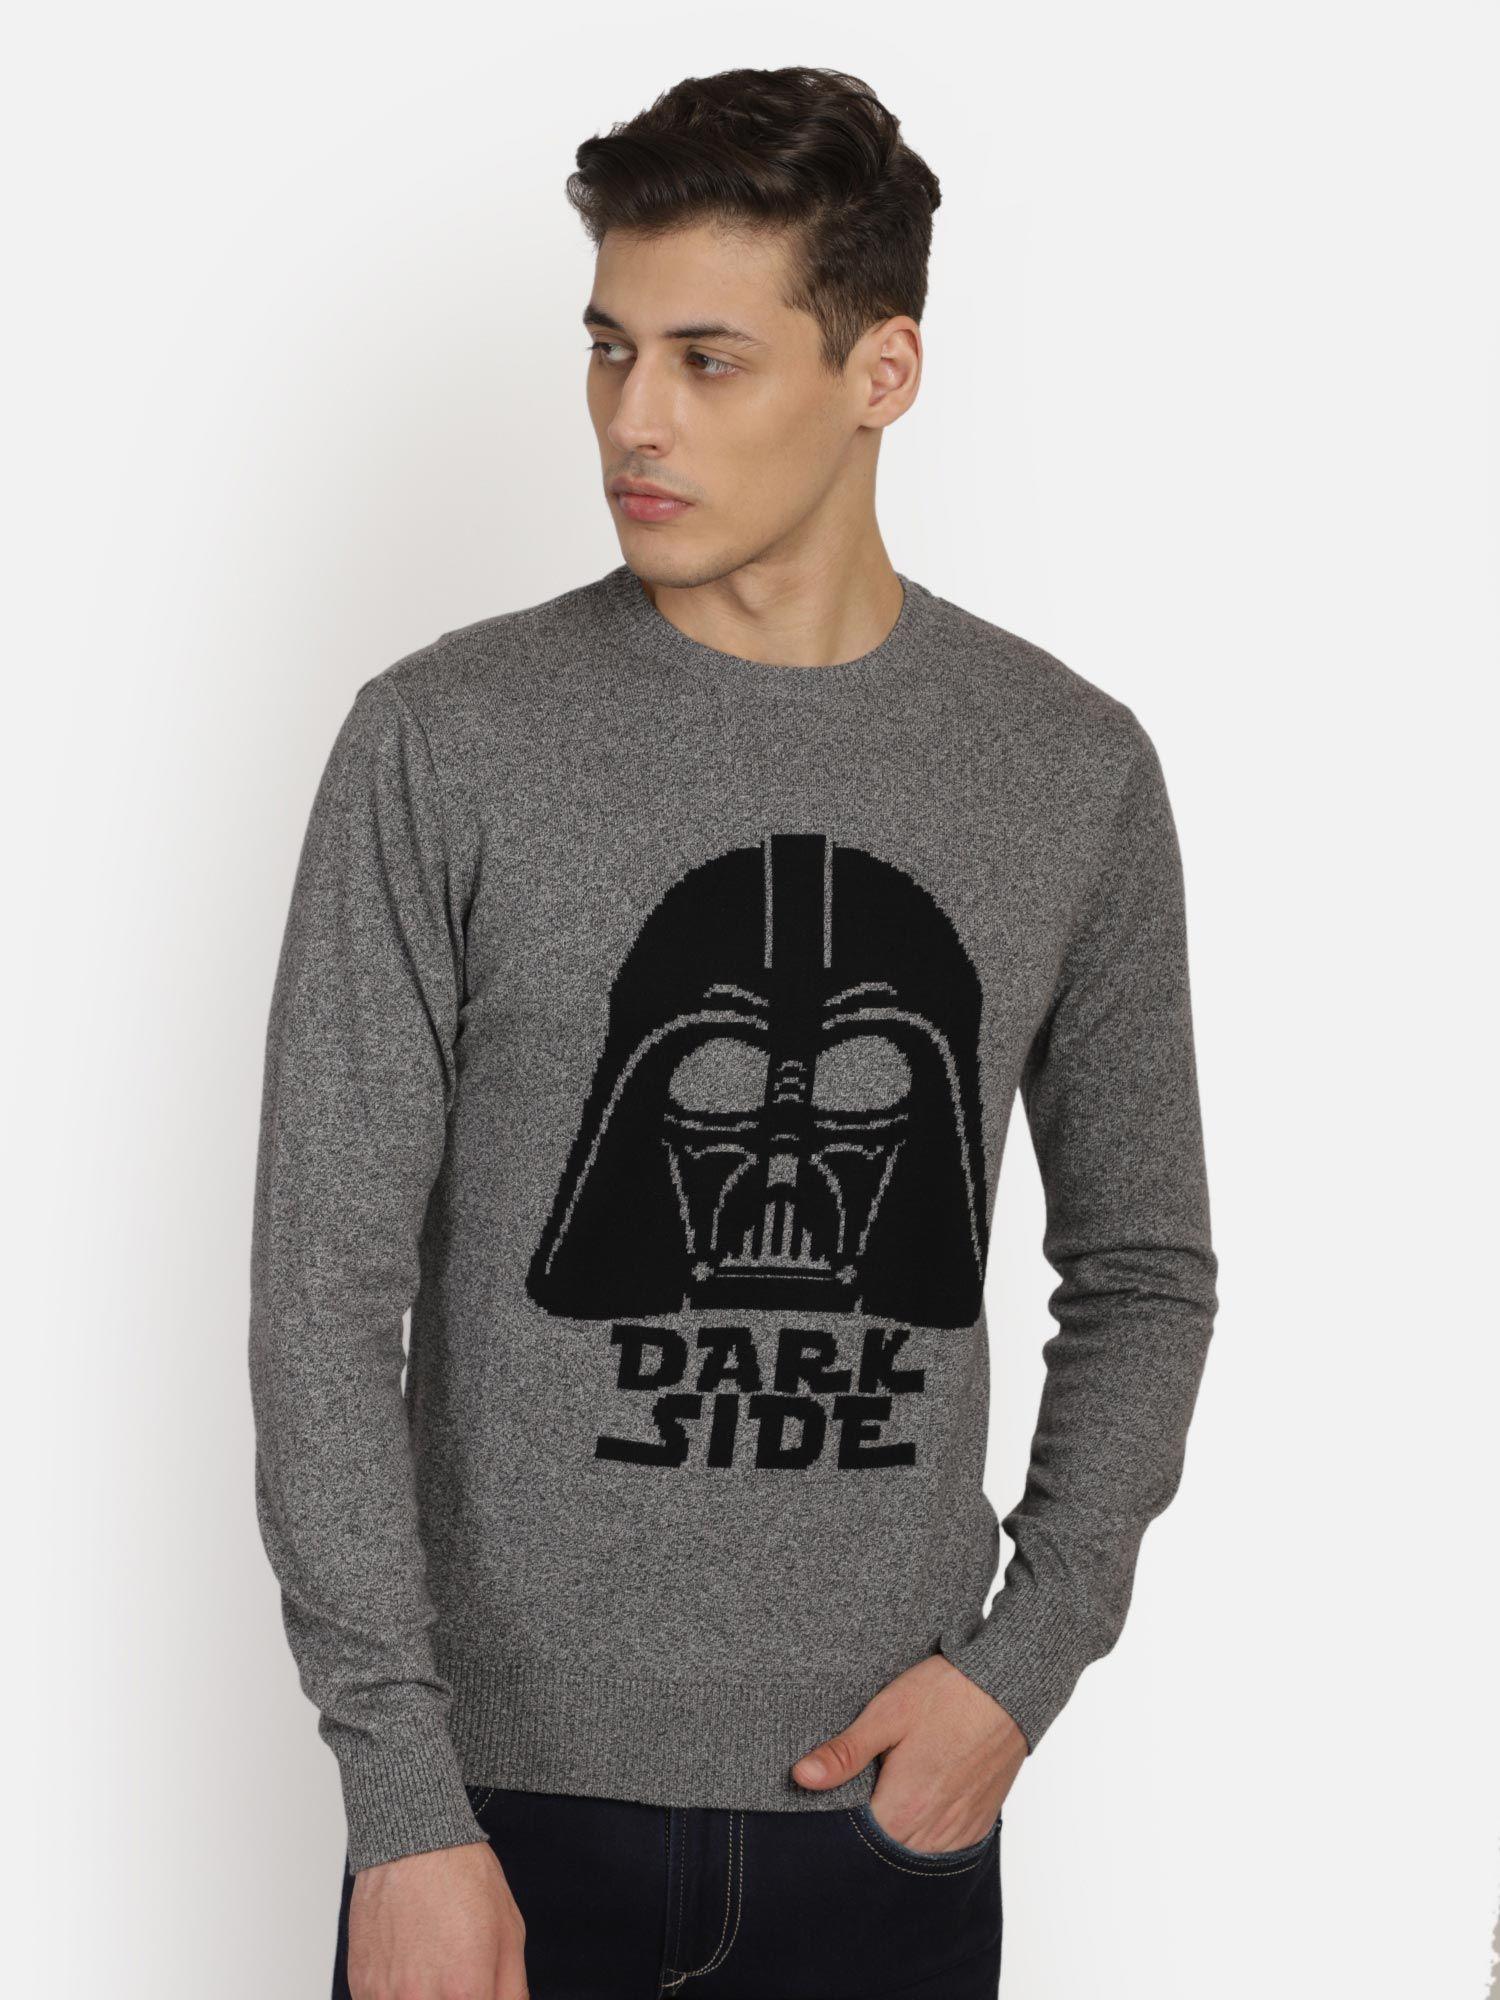 star-wars-featured-grey-sweater-for-men